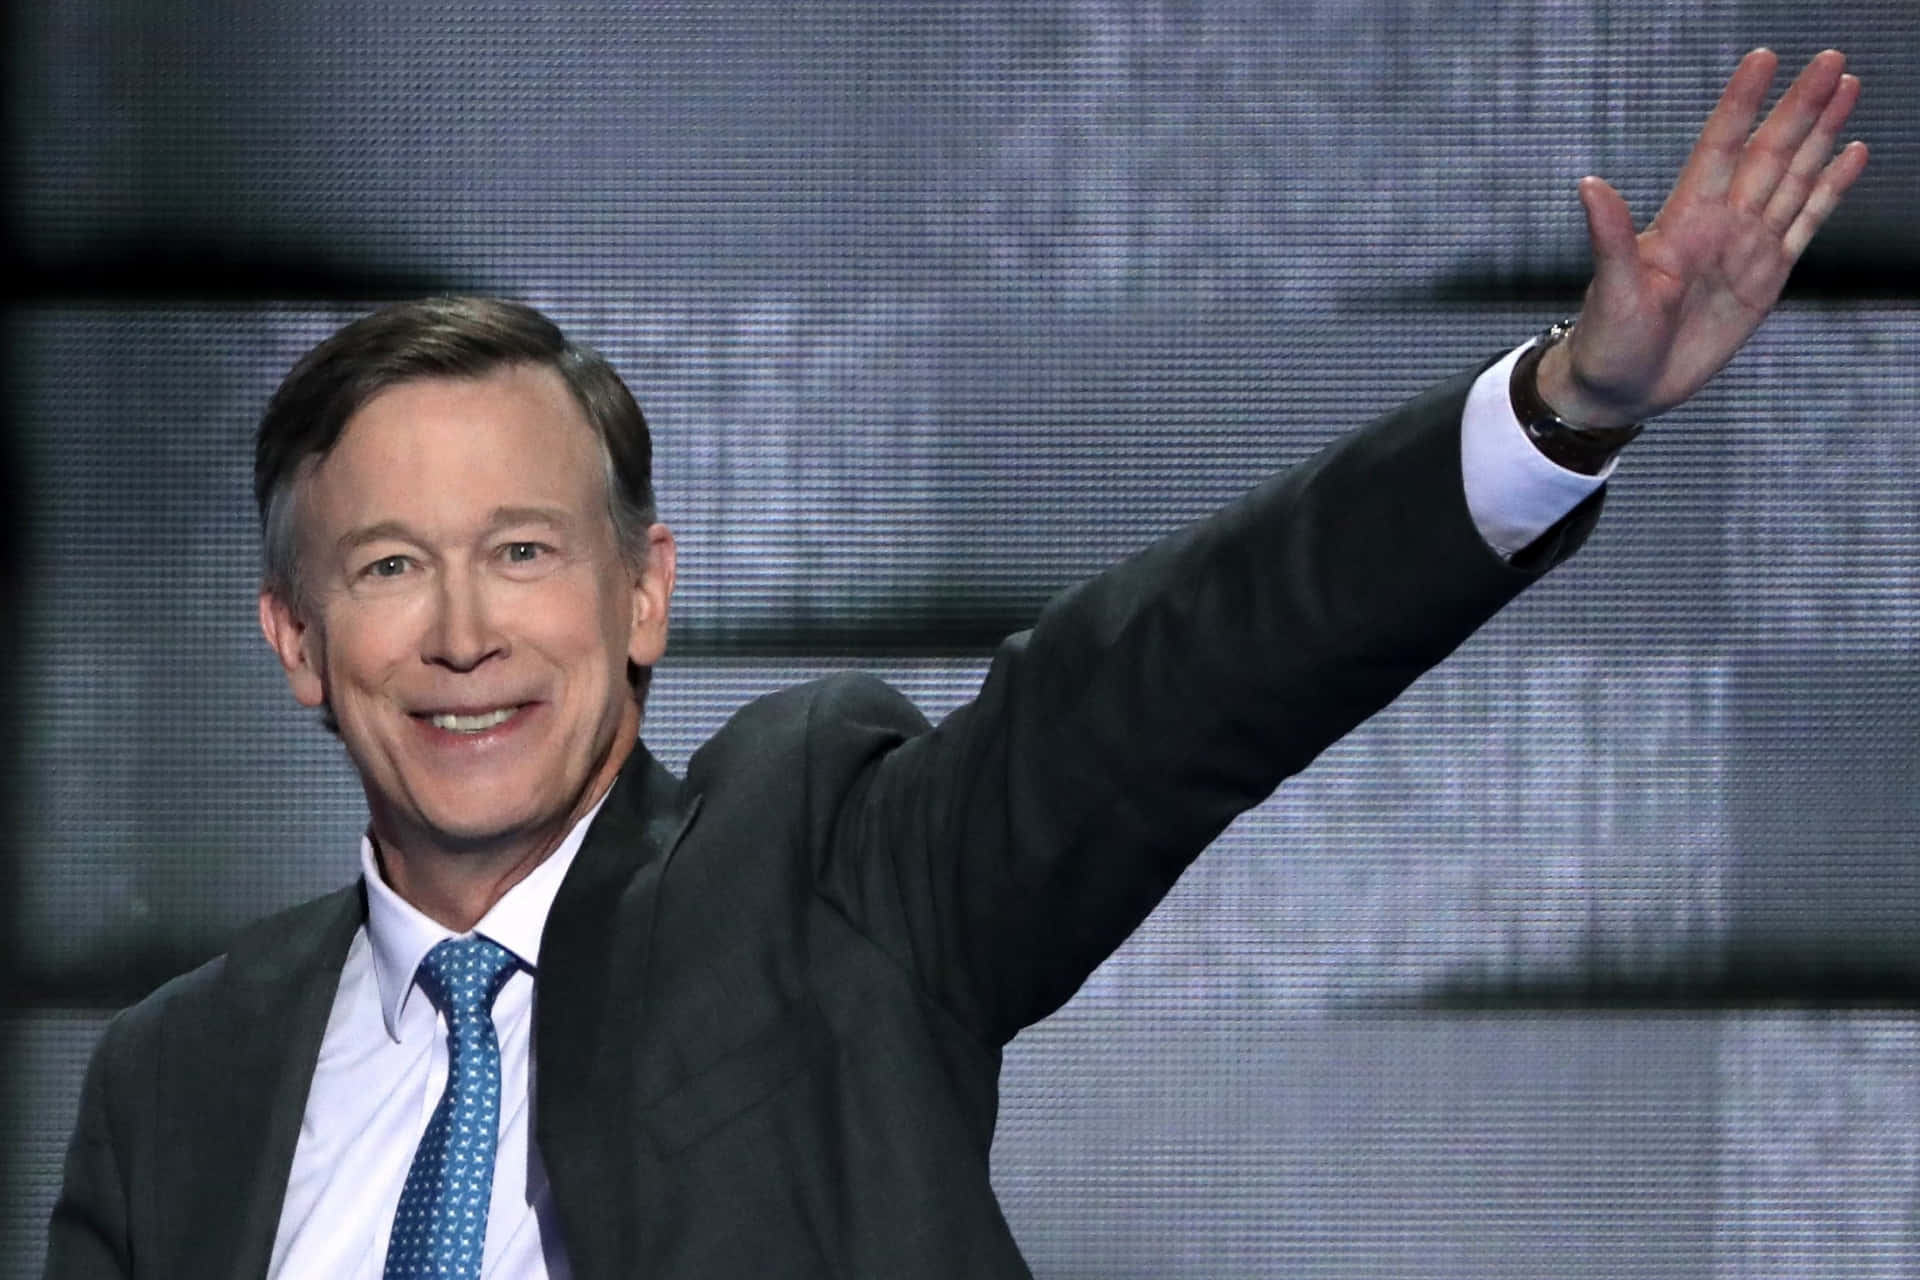 John Hickenlooper Waving With A Gray Background Wallpaper